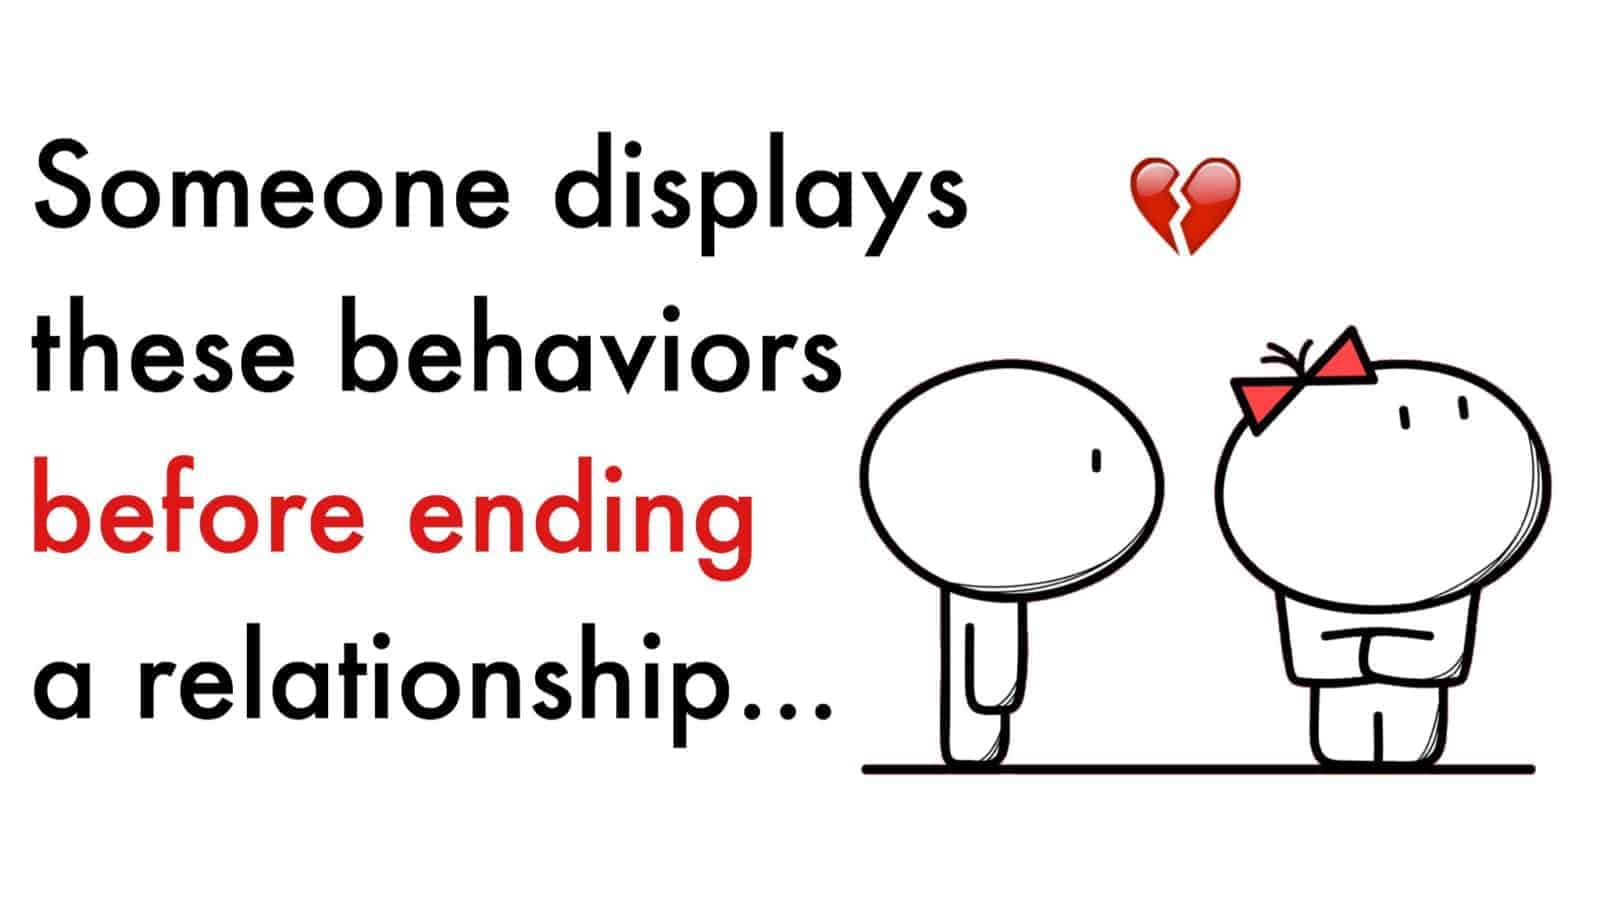 15 Behaviors Someone Displays In A Relationship When They Want to End It